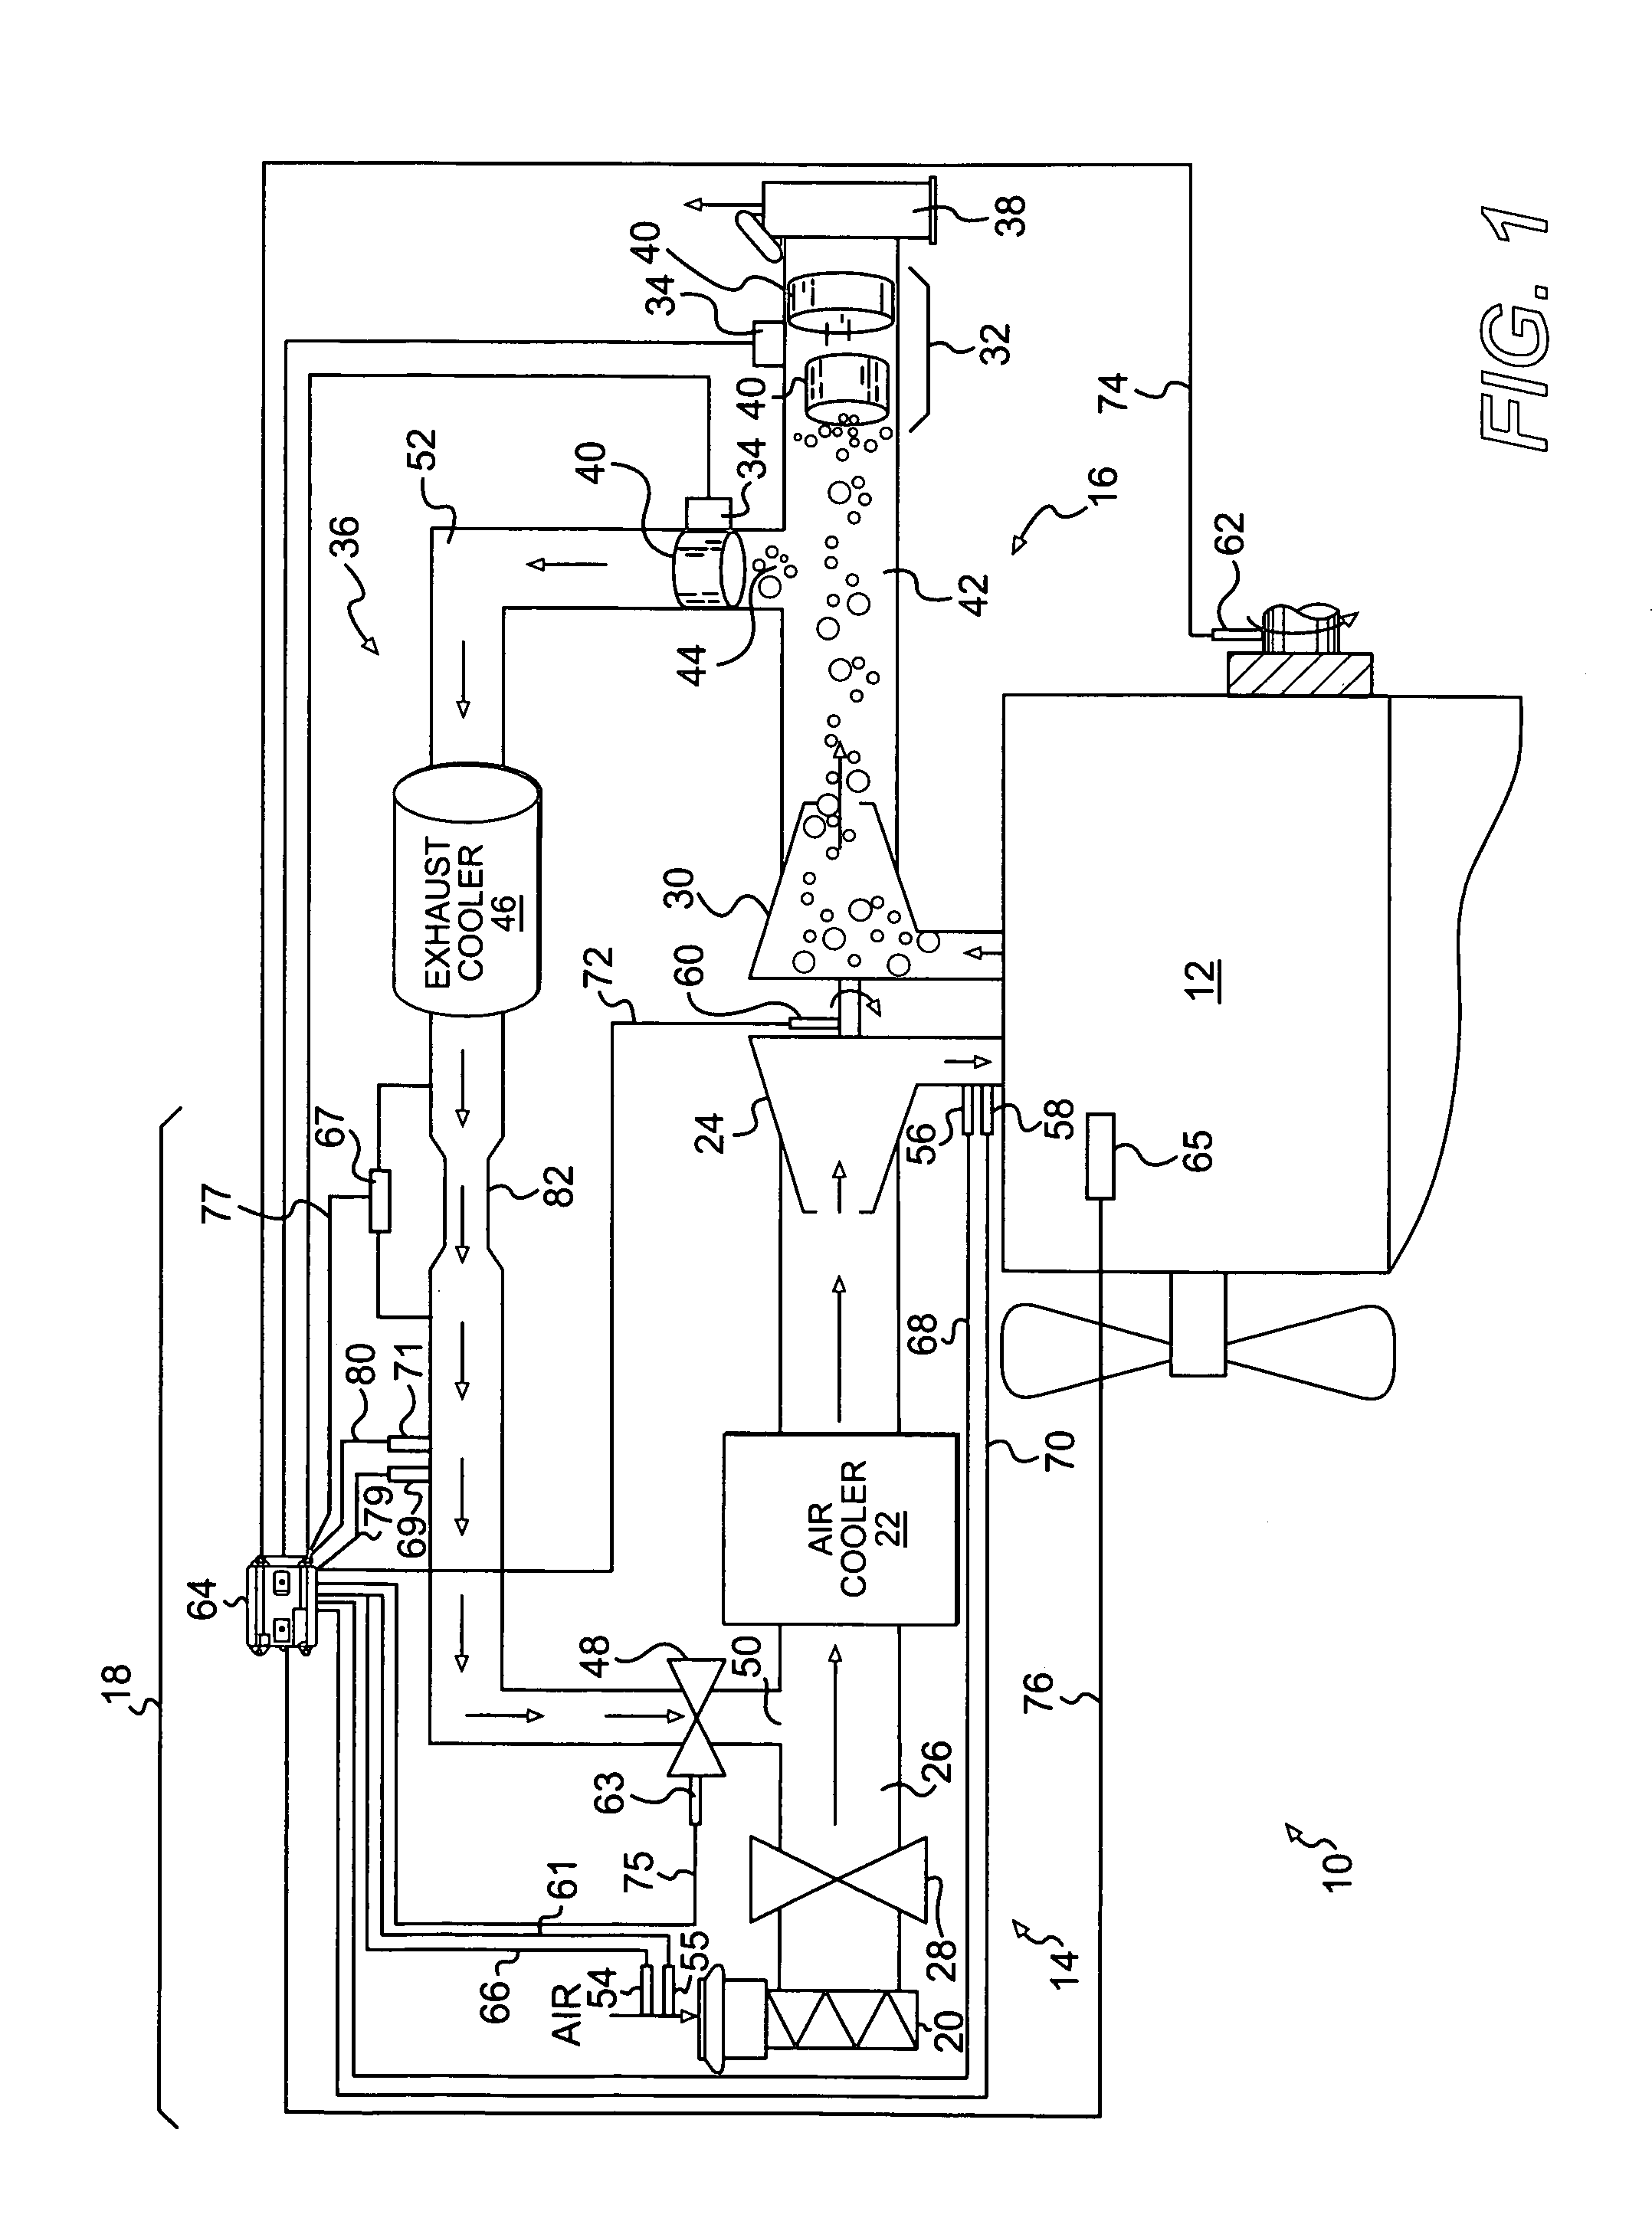 Control system and method for estimating turbocharger performance